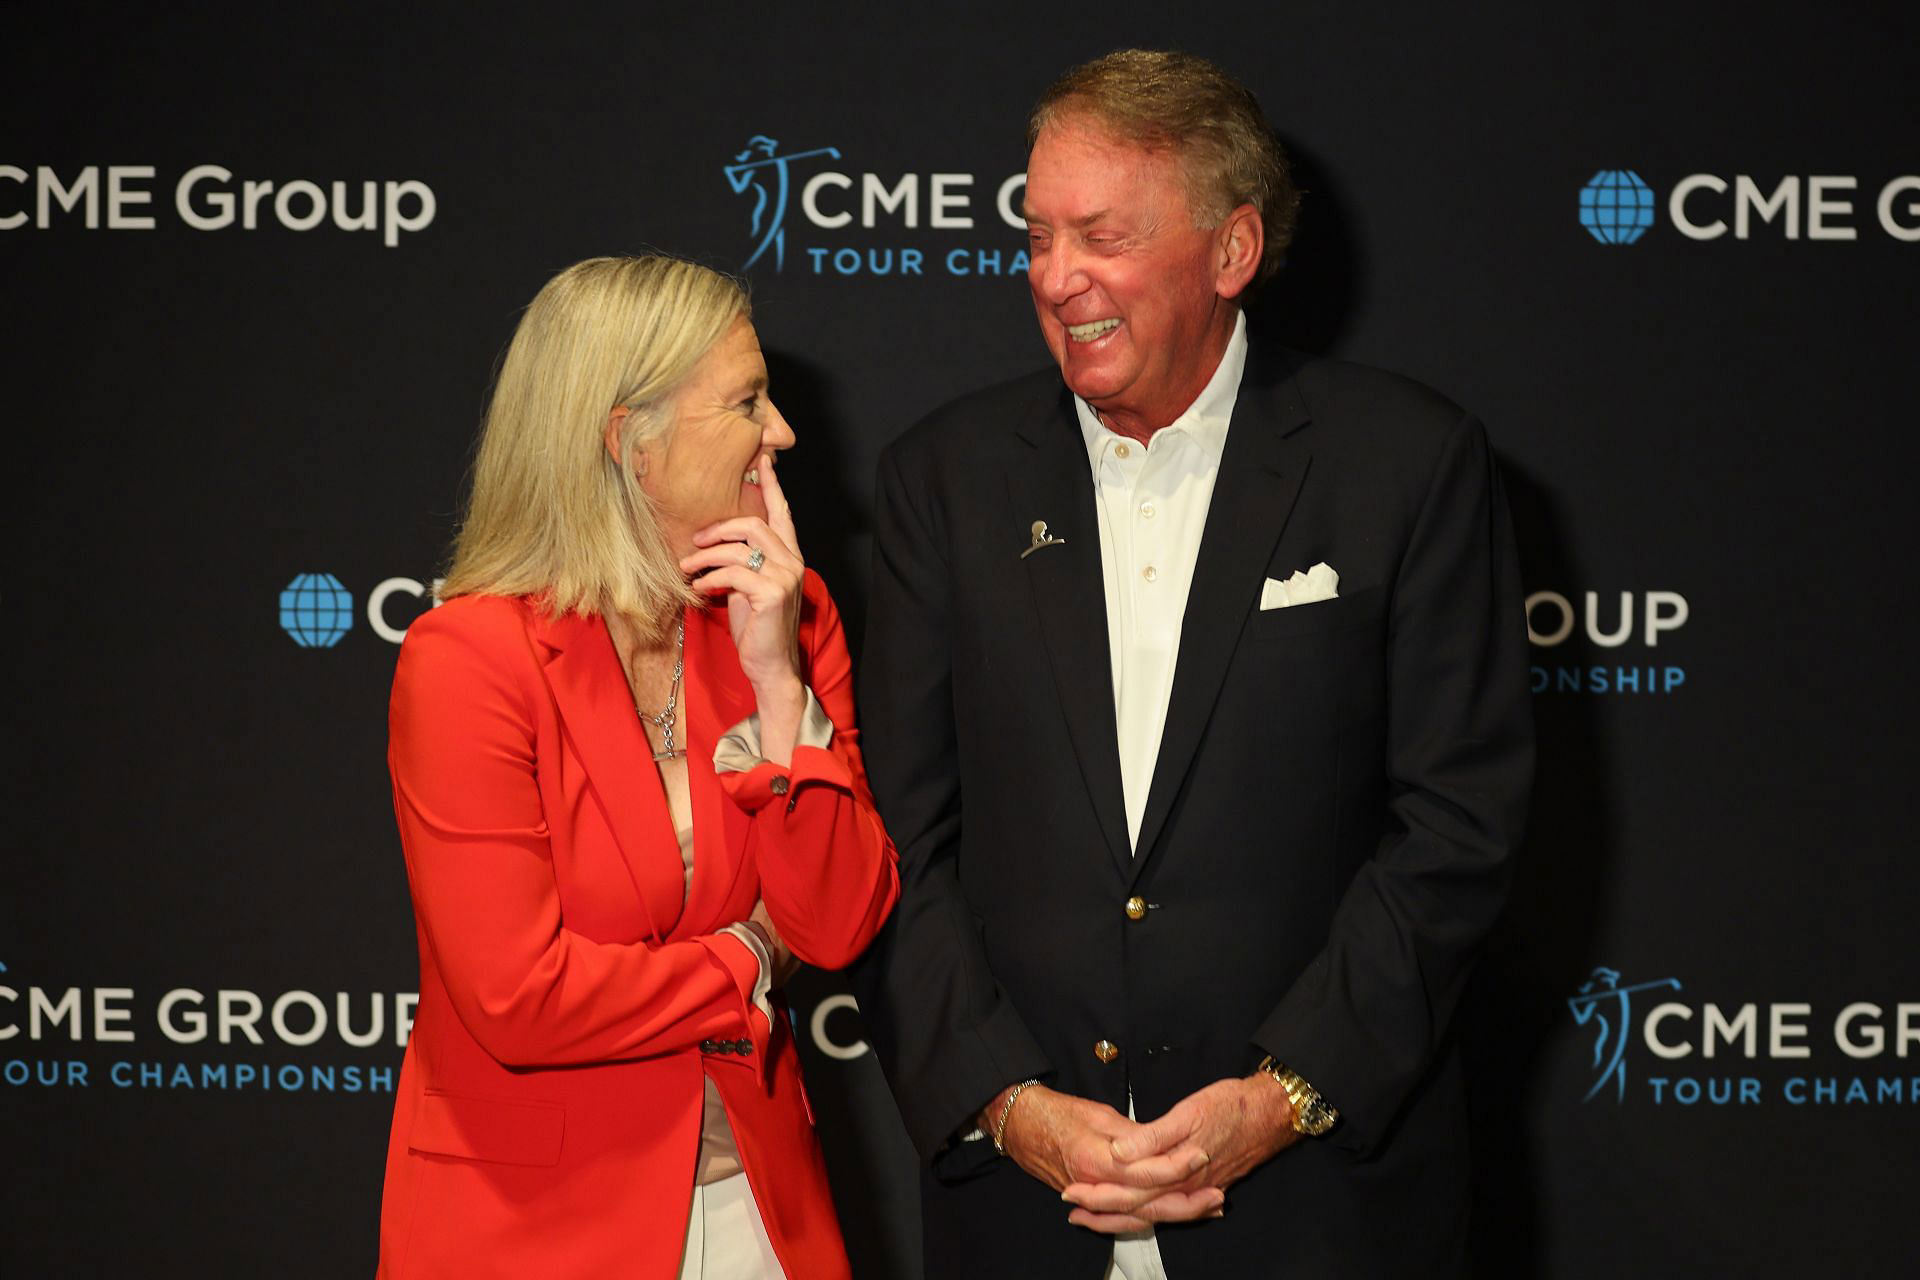 CME Group Tour Championship announces purse increase, elevating winner